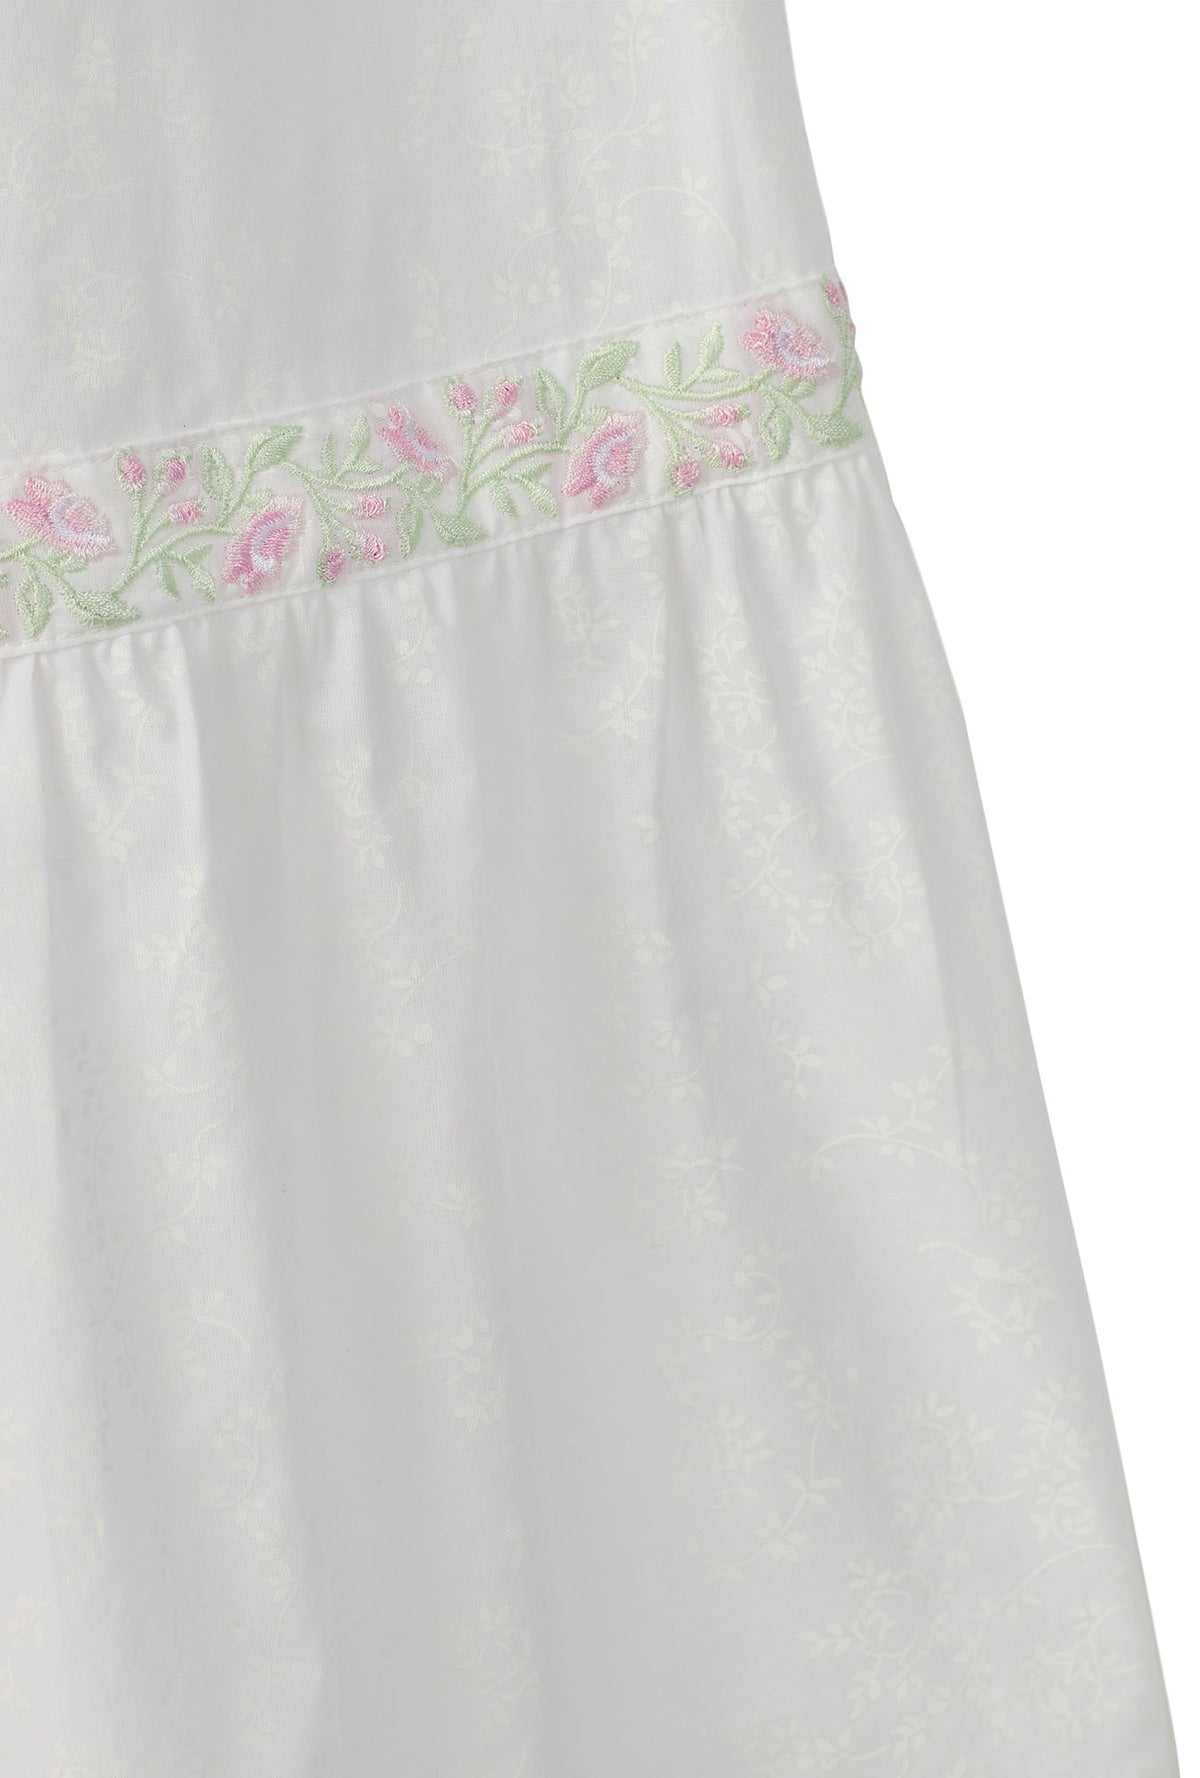 A lady wearing white sleeveless eileen cotton nightgown with garden rose embroidered  pattern.